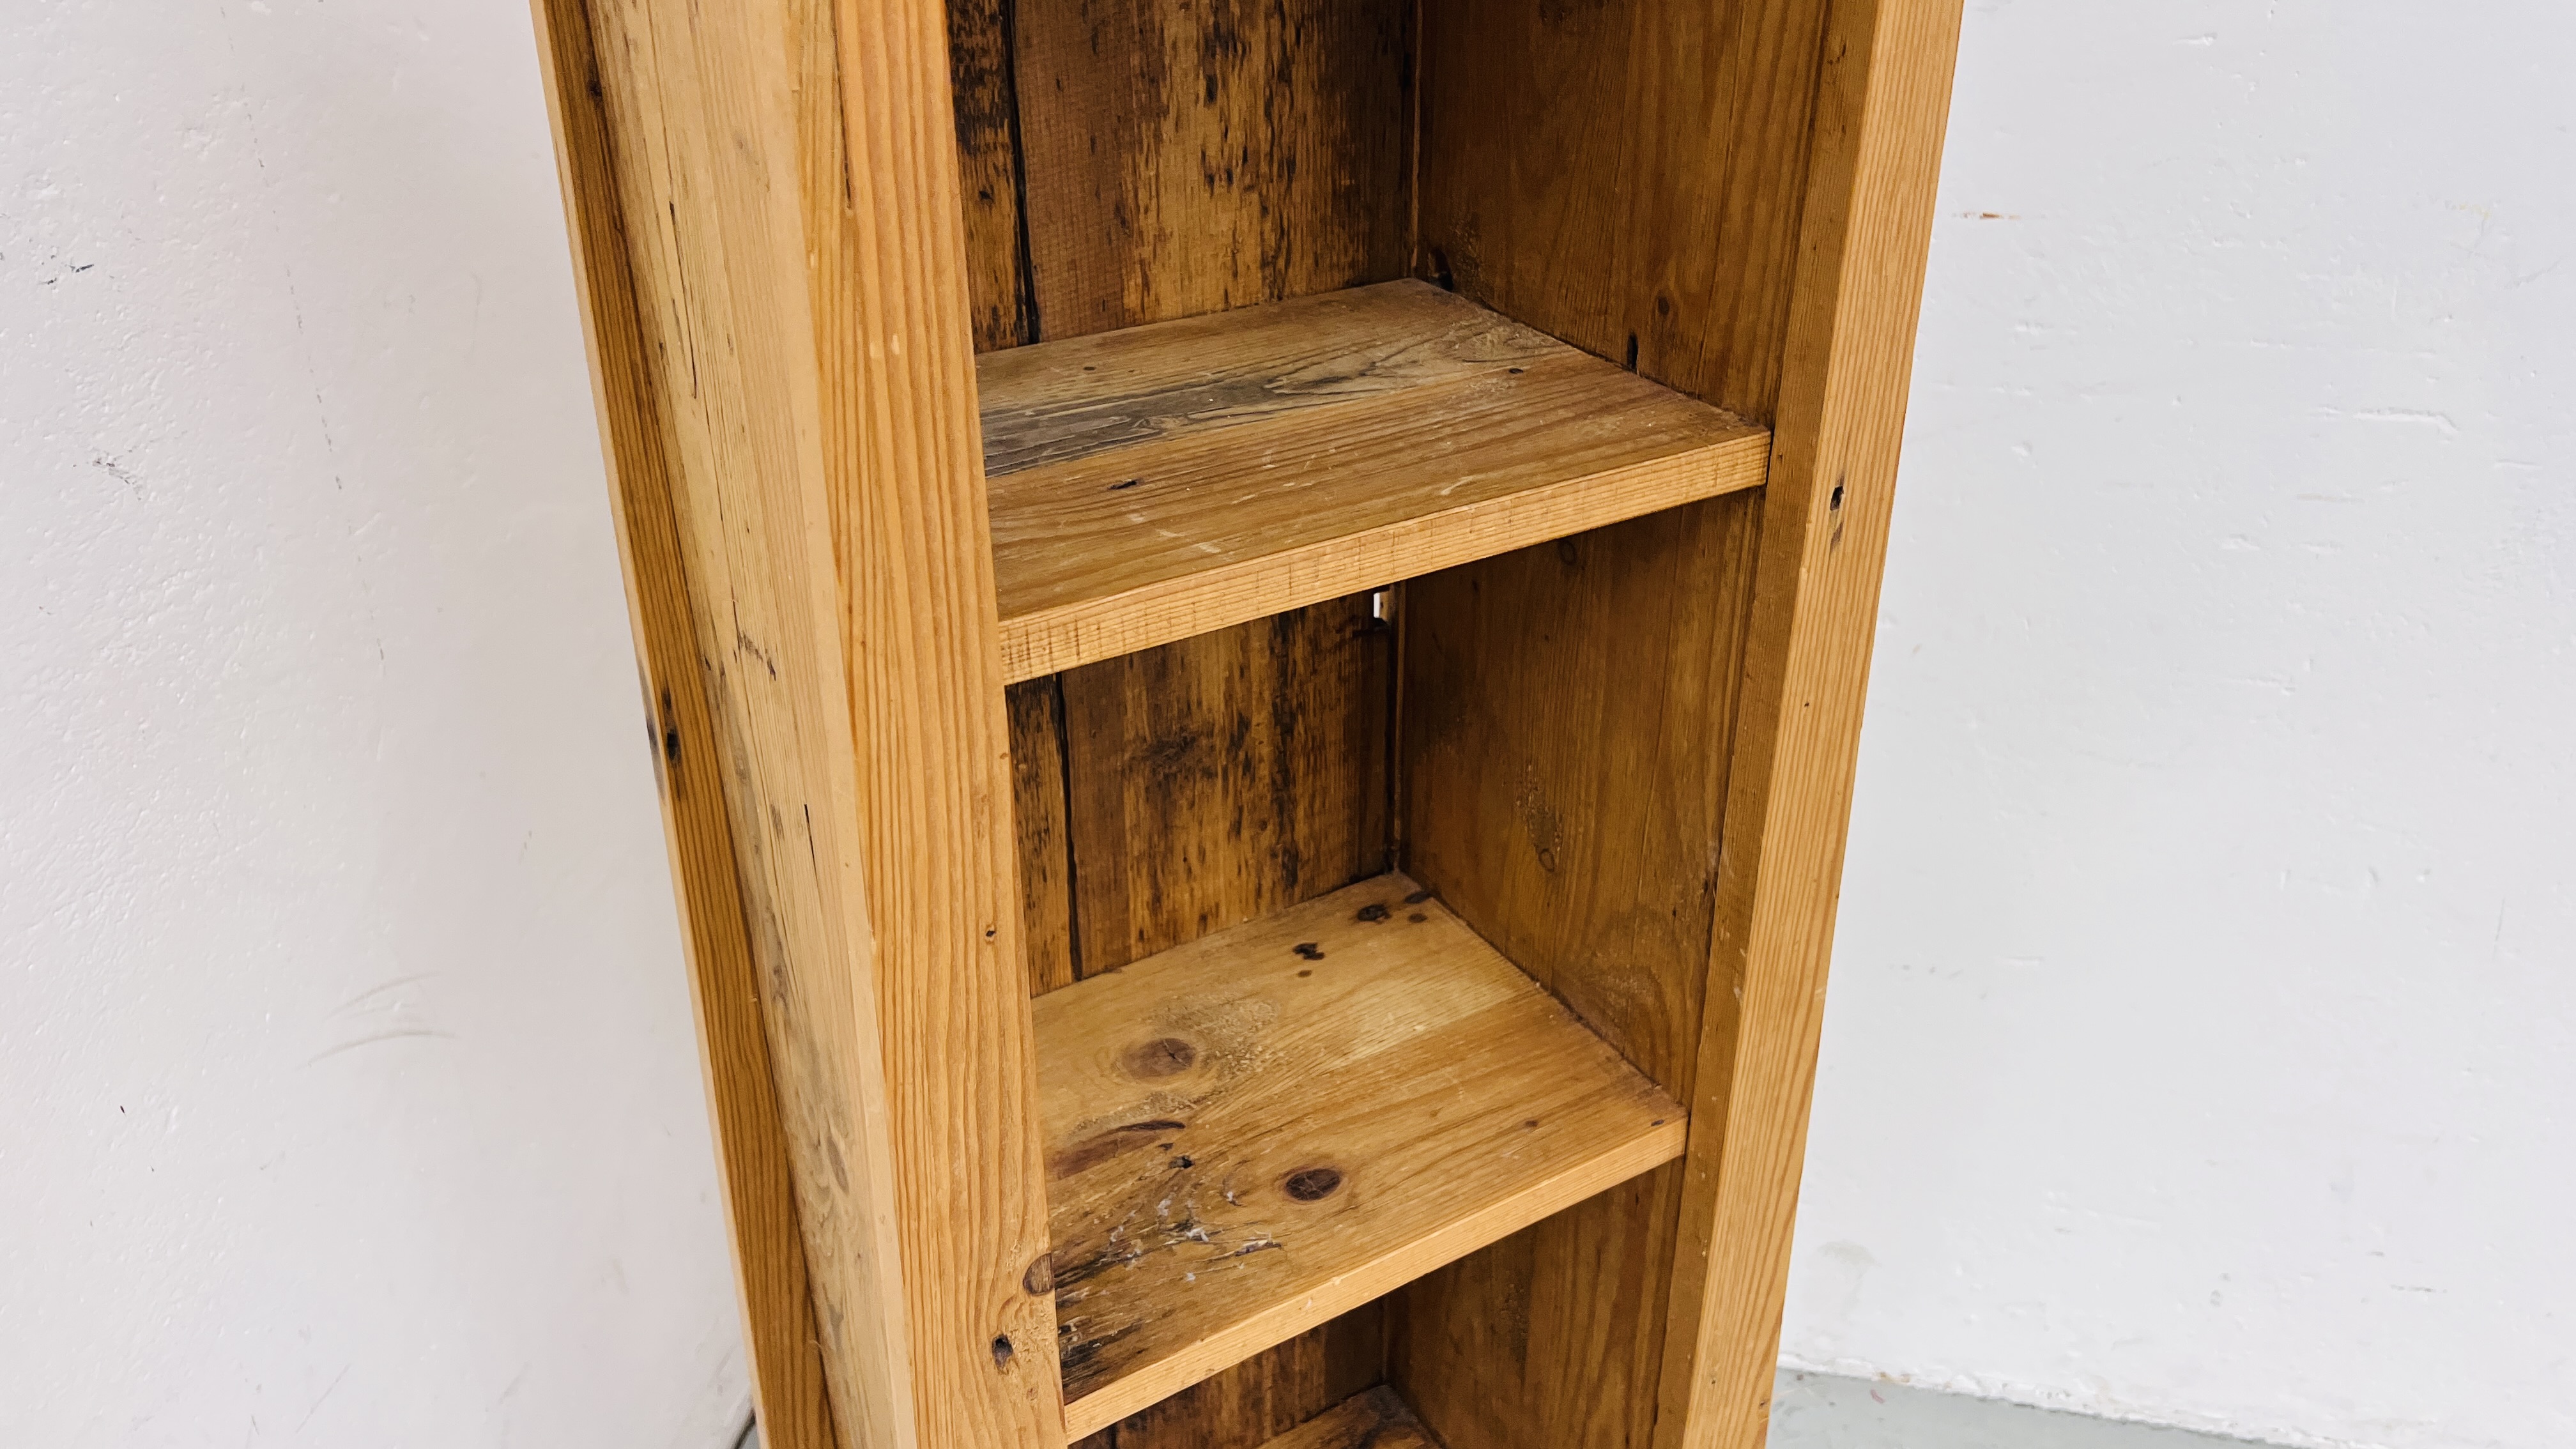 A 3 TIER RUSTIC PINE STAND H 123CM X D 29.5CM X W 44CM. - Image 4 of 7